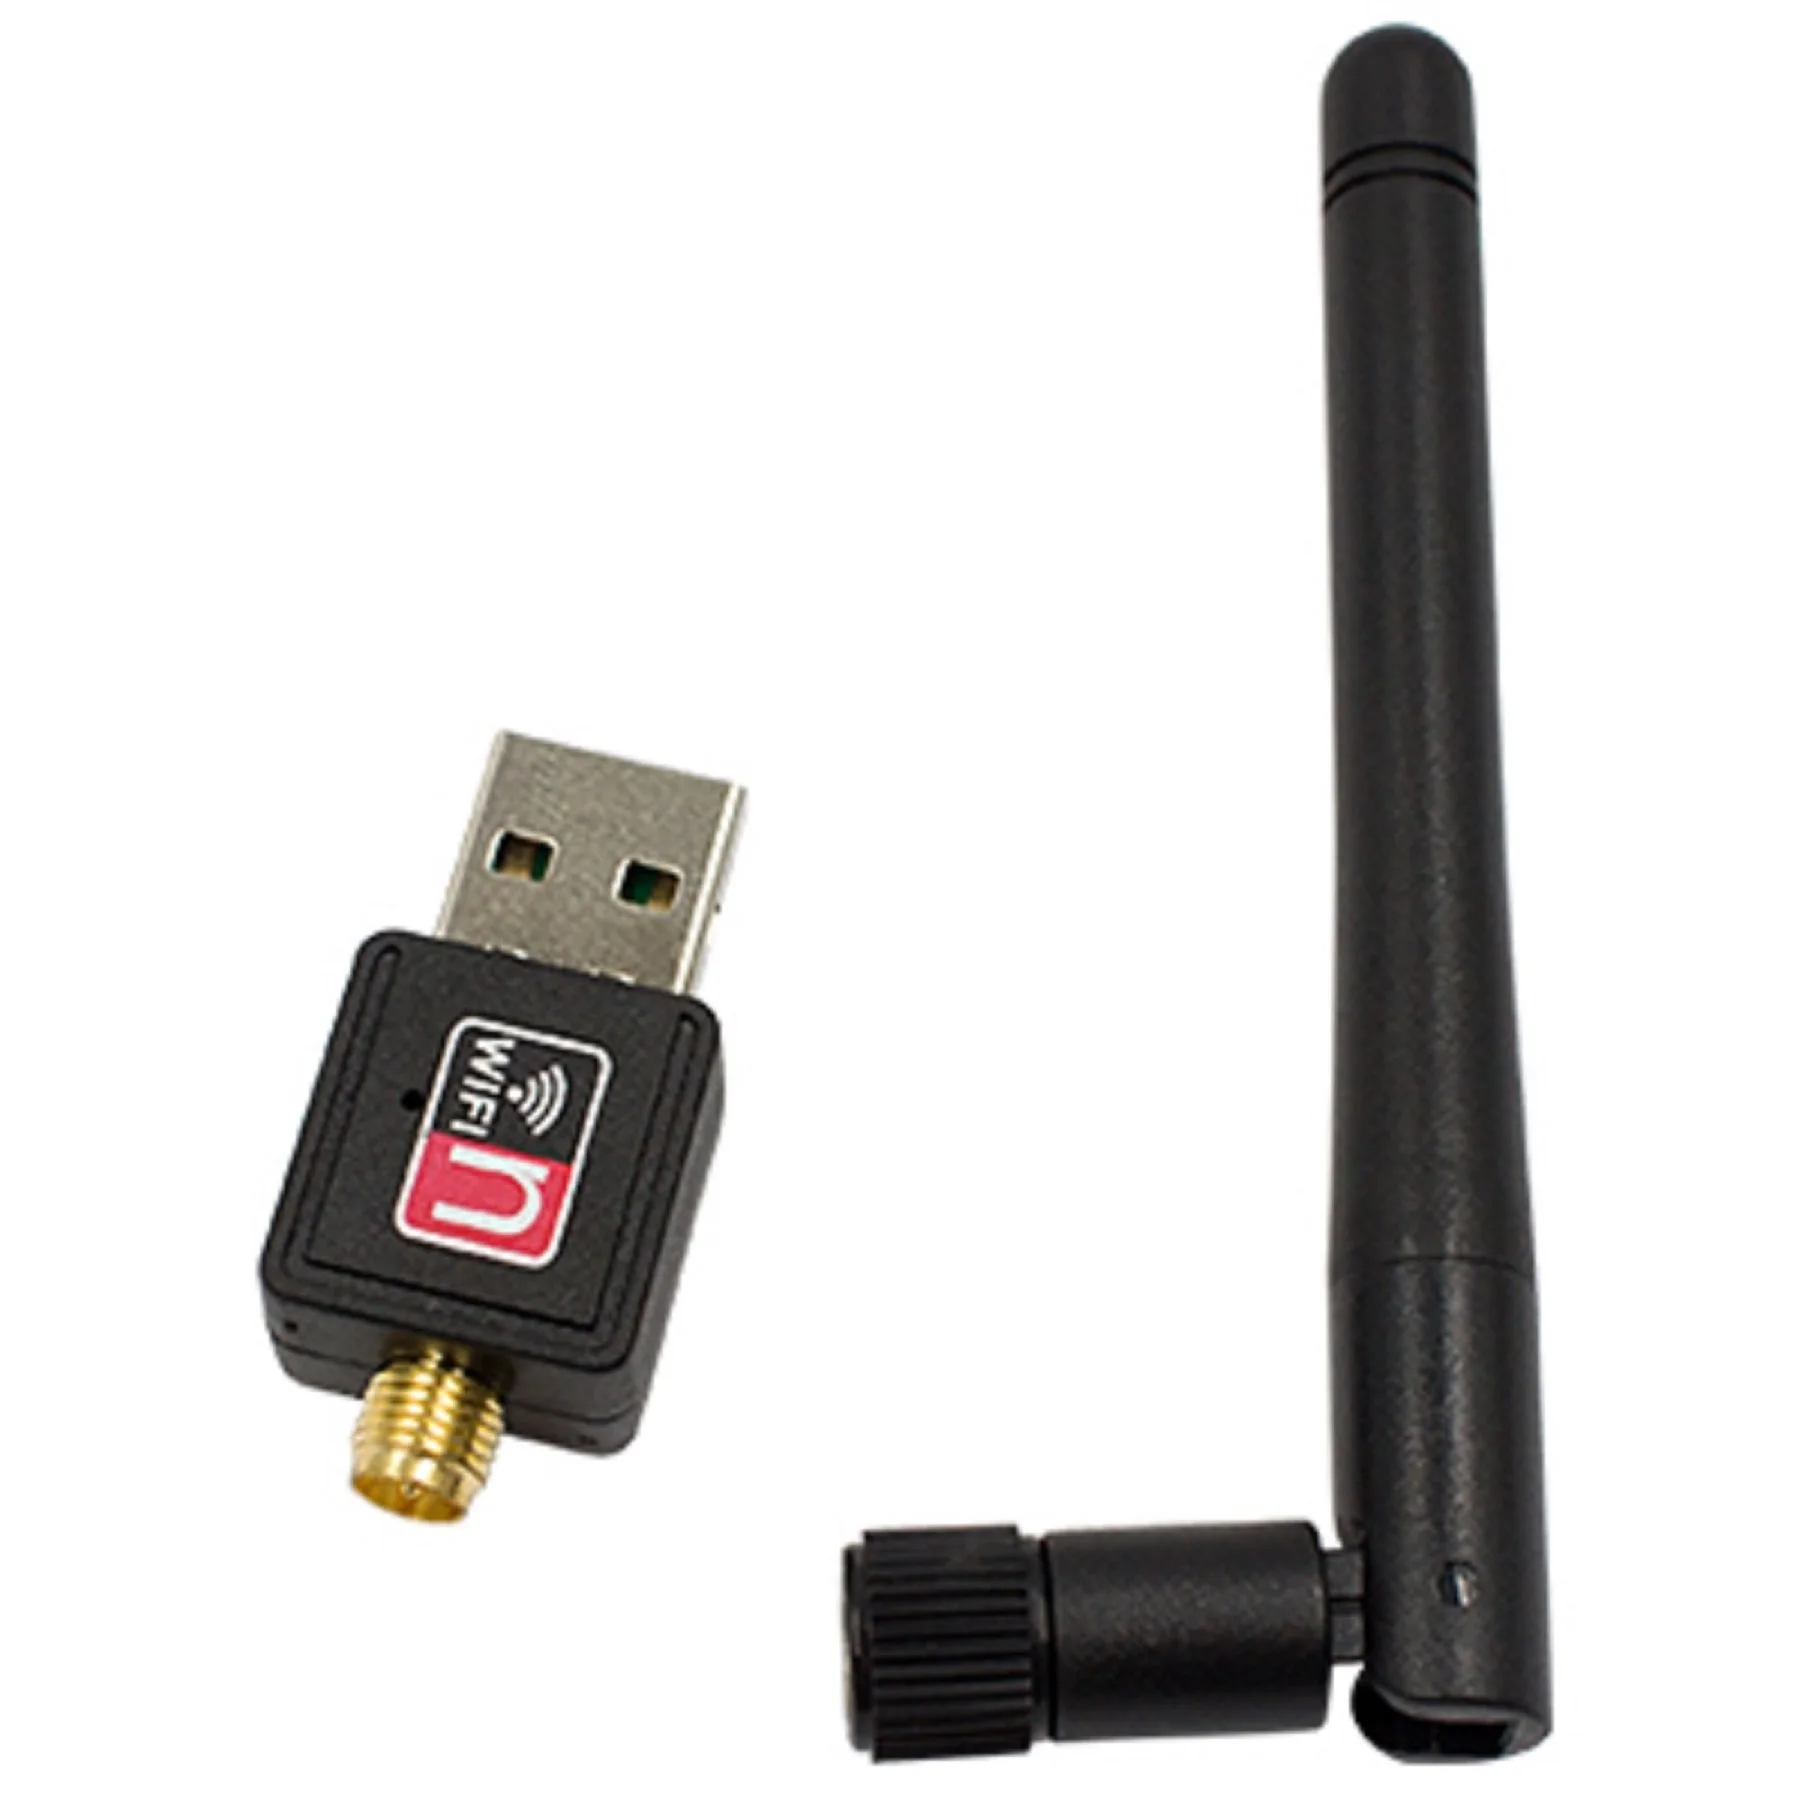 

High Speed Tp Link MTK7601 USB Network Card 2.4GHz Wireless wifi Dongle 150Mbps USB WiFi Adapter with External Antenna